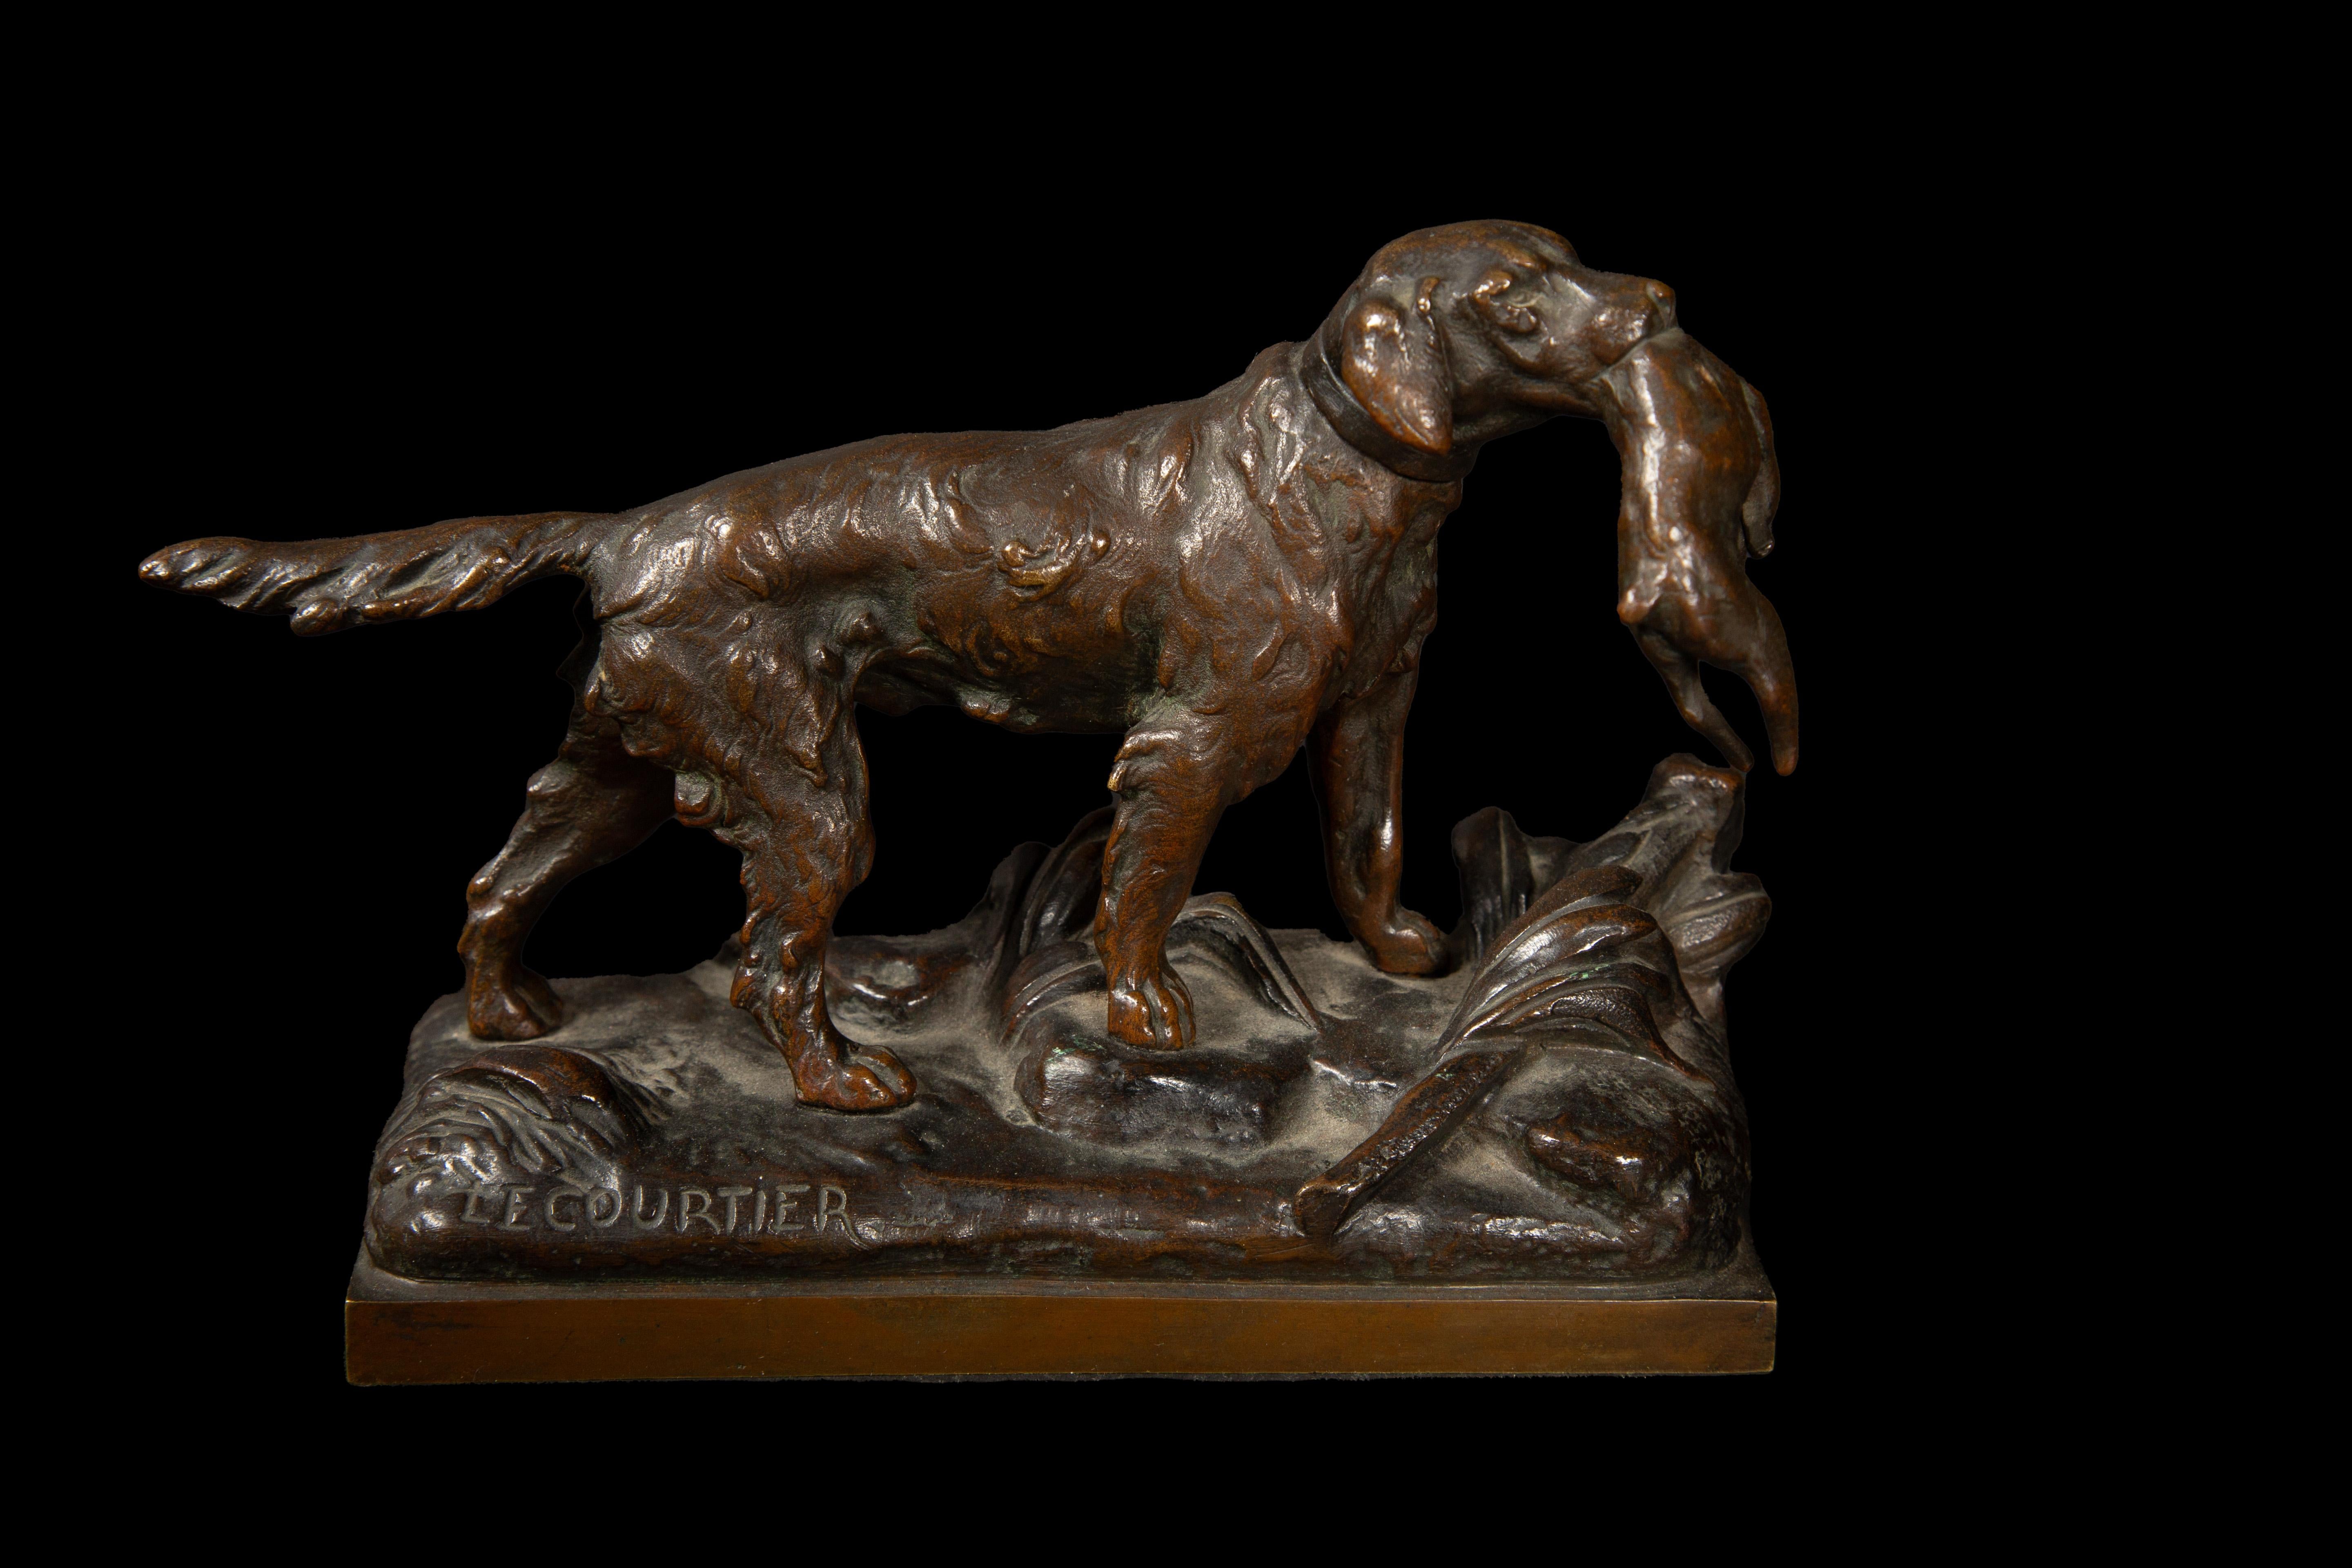 After Prosper LECOURTIER (1855-1924), a renowned sculptor known for his exceptional talent in capturing the essence and beauty of animals, we find a remarkable hunting dog sculpture holding a hare. The bronze artwork showcases LECOURTIER's mastery,